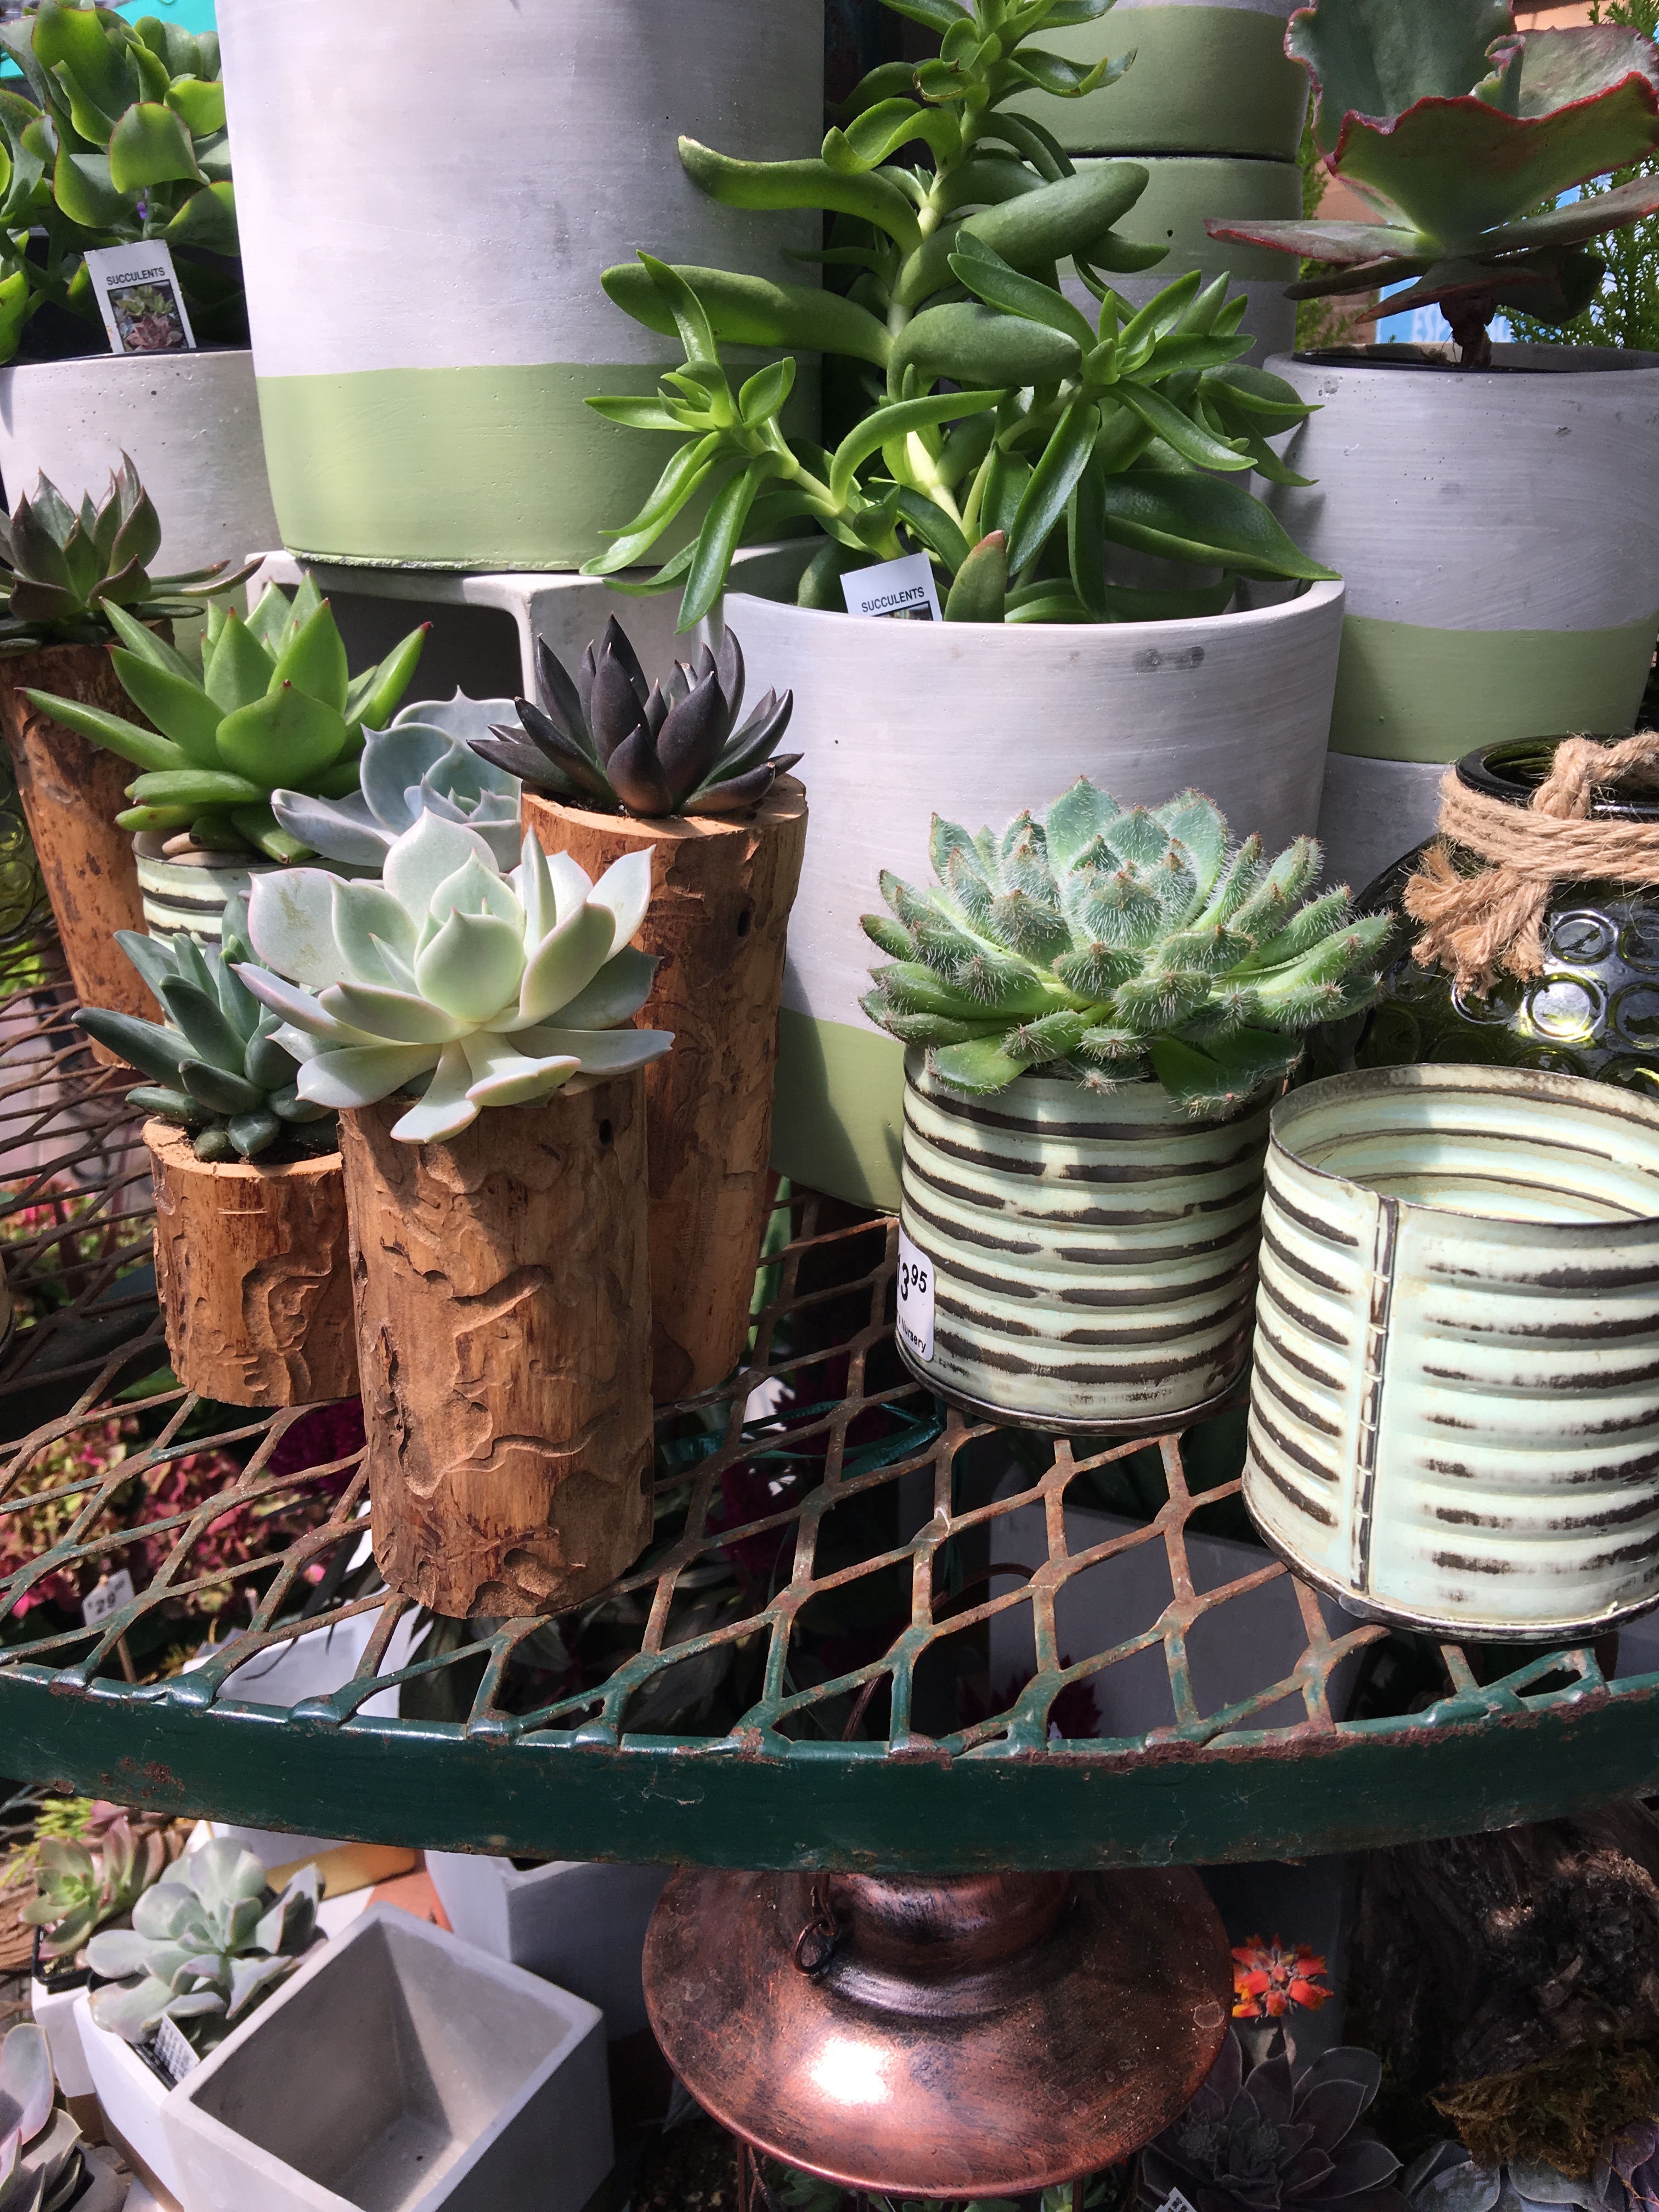 A metal table with small and large succulents on it.